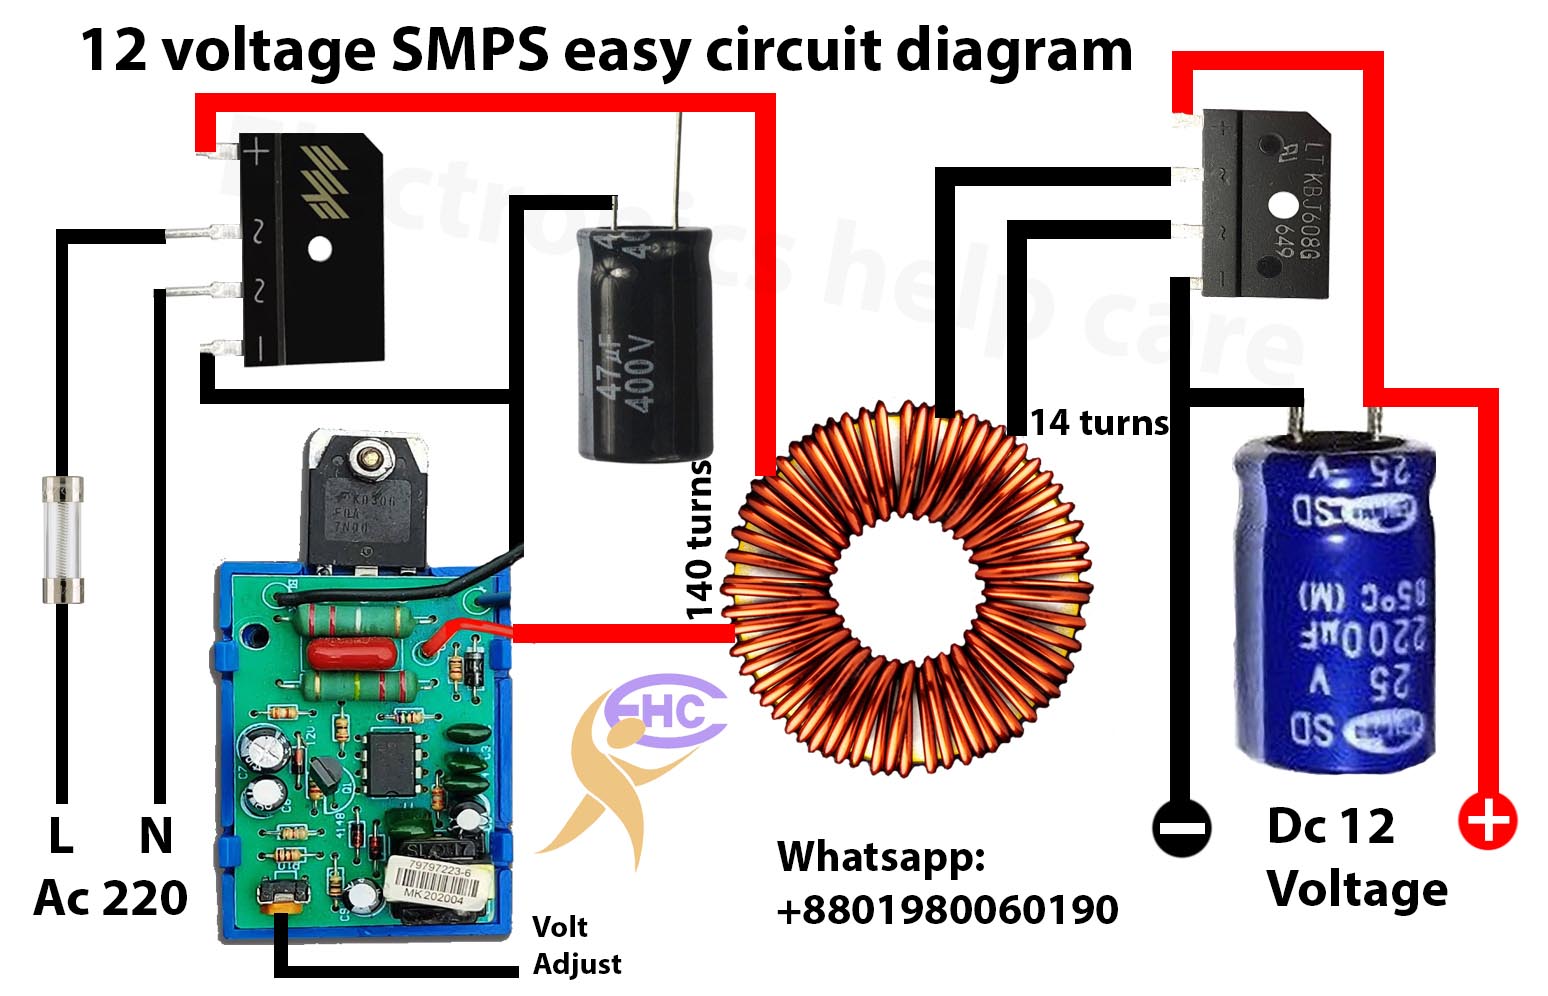 How to make 12 voltage SMPS